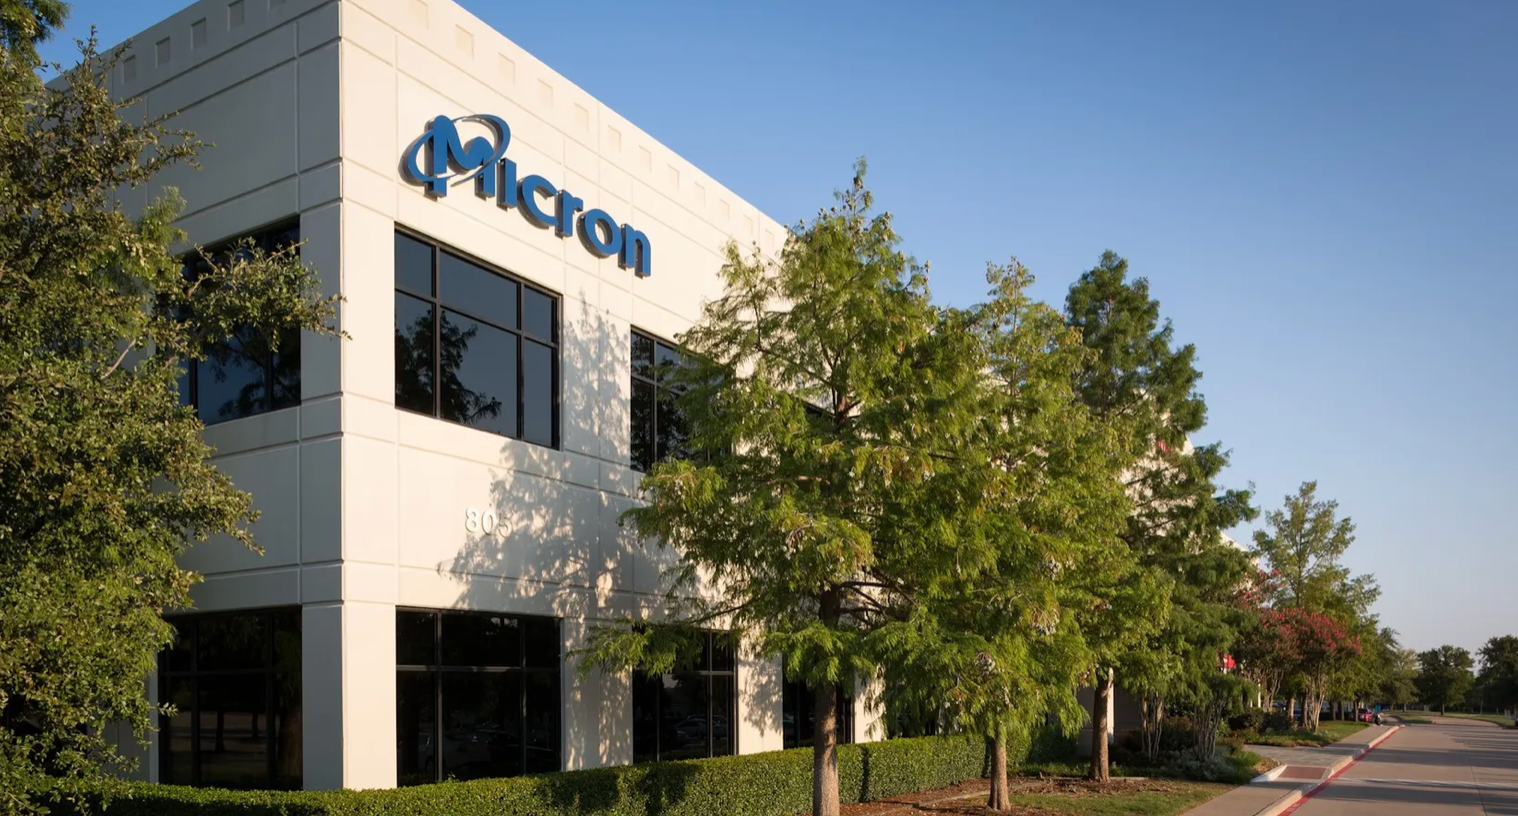 After-Hours Alert: What's Going On With Micron Stock?